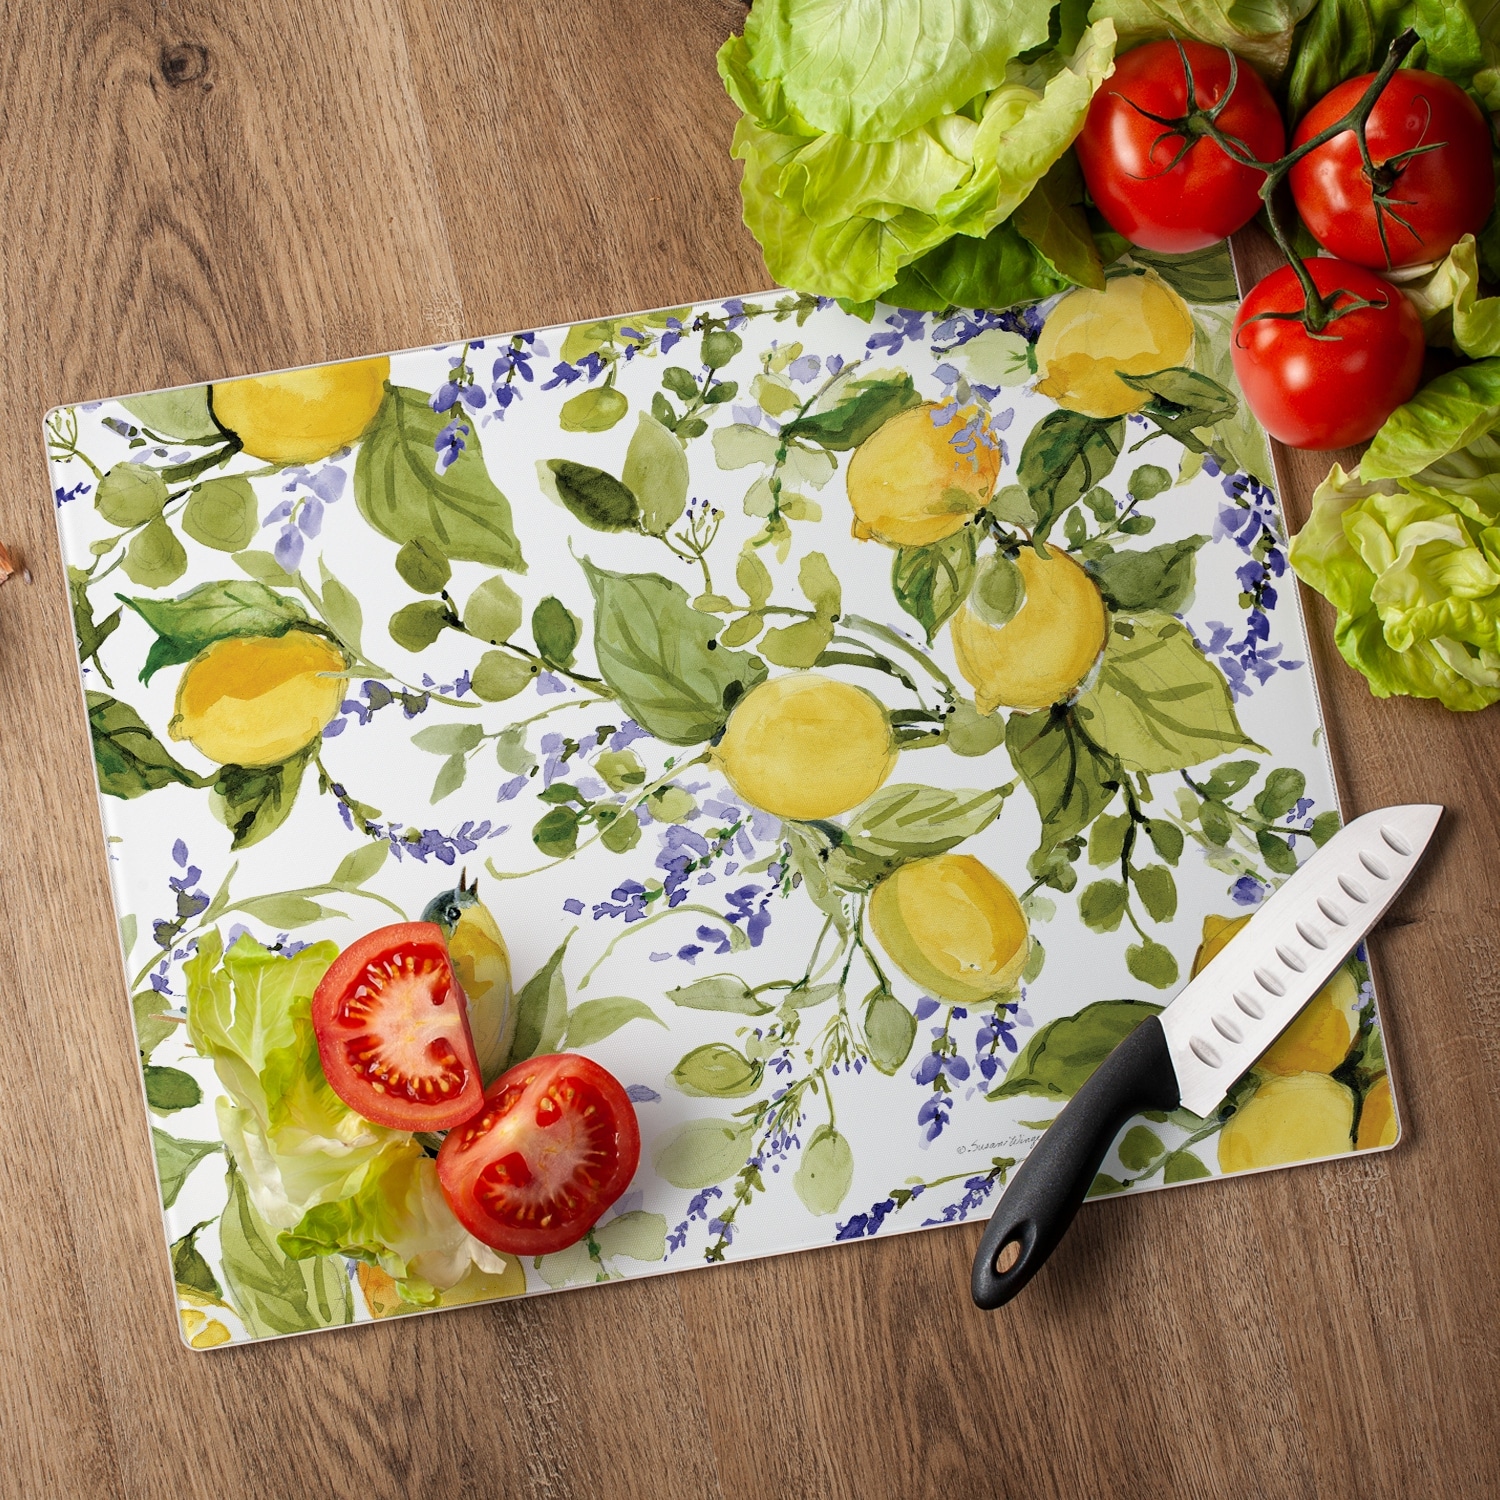 https://ak1.ostkcdn.com/images/products/is/images/direct/2a9a196f90b0d3d950f728c2cdcec0dc8dcf9eeb/Tempered-Glass-Counter-Saver---Cutting-Board-Watercolor-Lemons---15%22-x-12%22.jpg